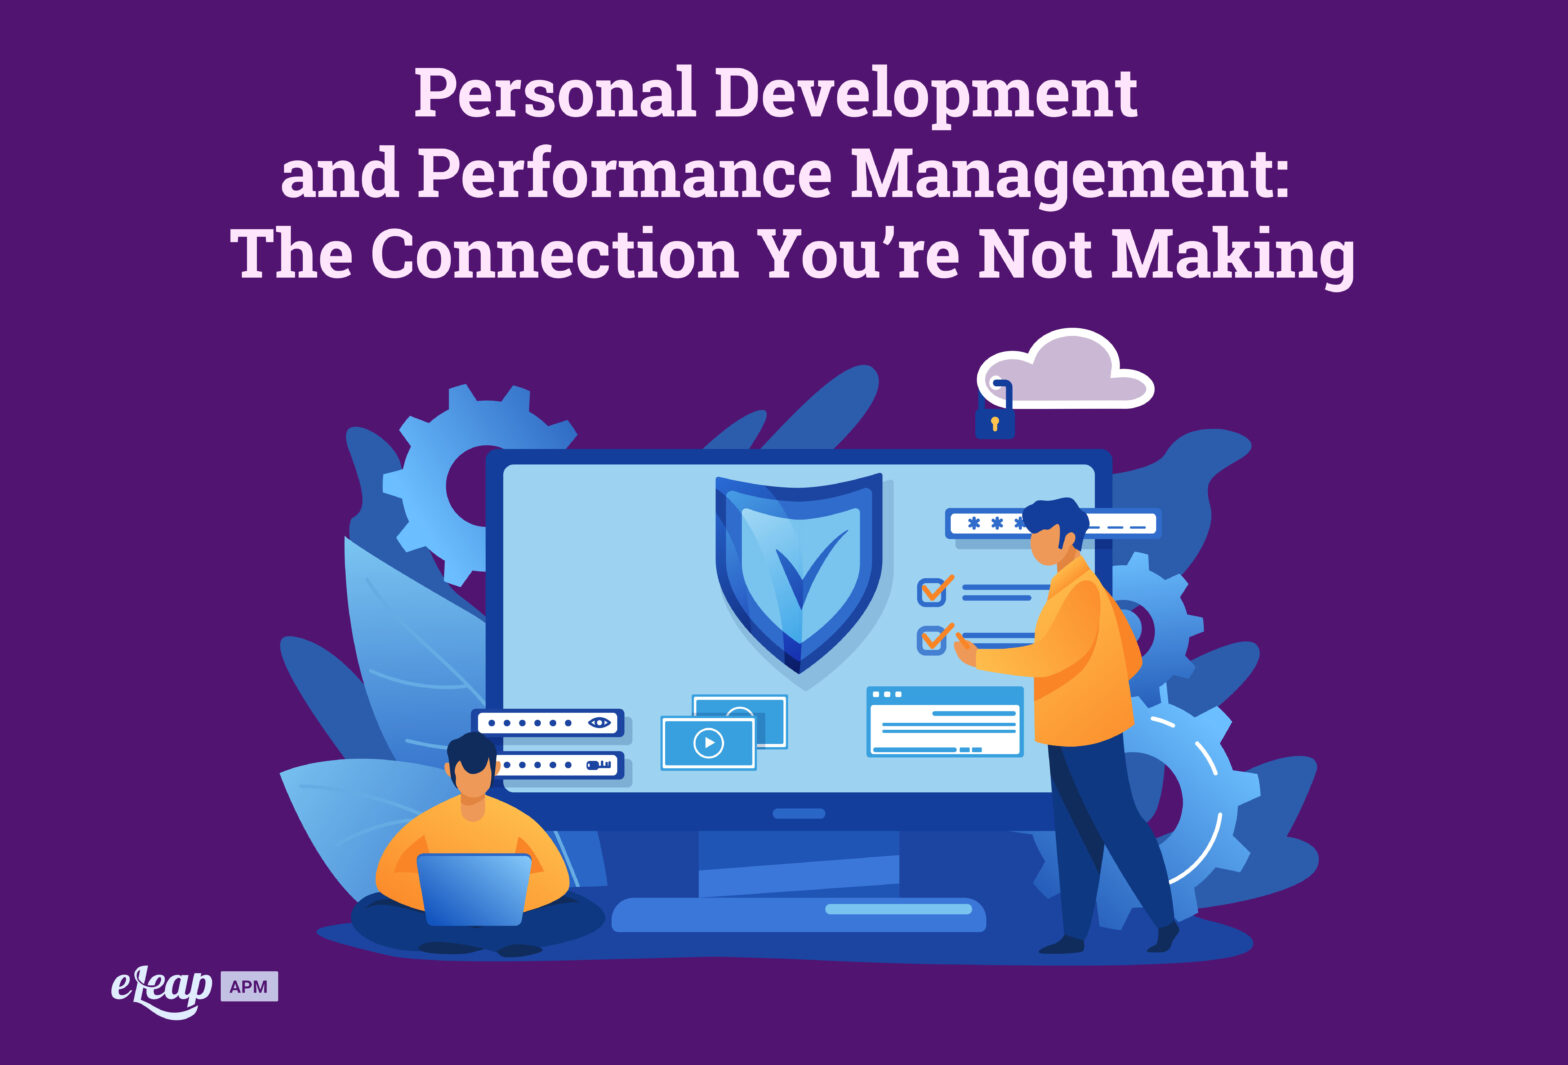 Personal Development and Performance Management: The Connection You’re Not Making